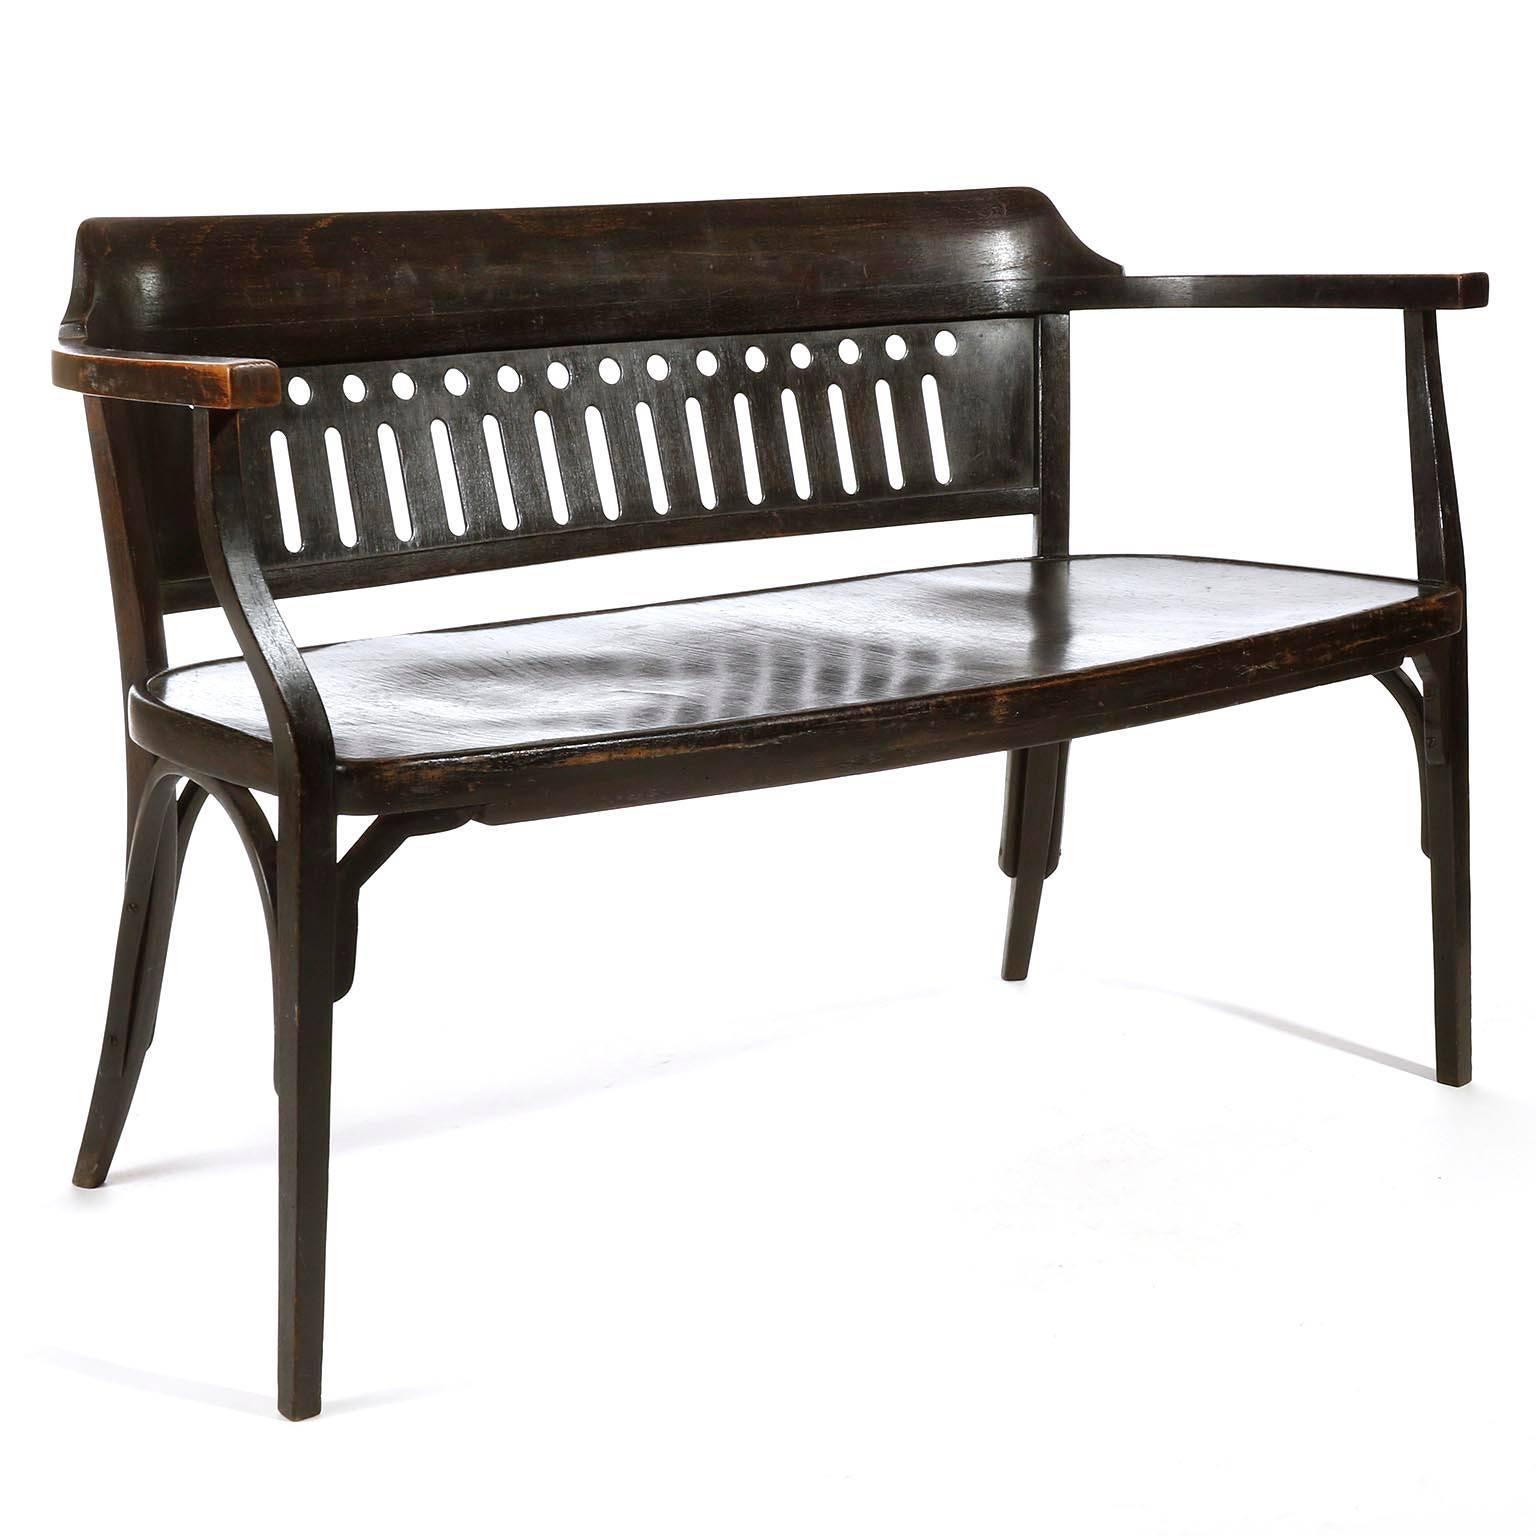 Polished Otto Wagner Settee Bench by Thonet, Austria, Vienna Secession, circa 1905